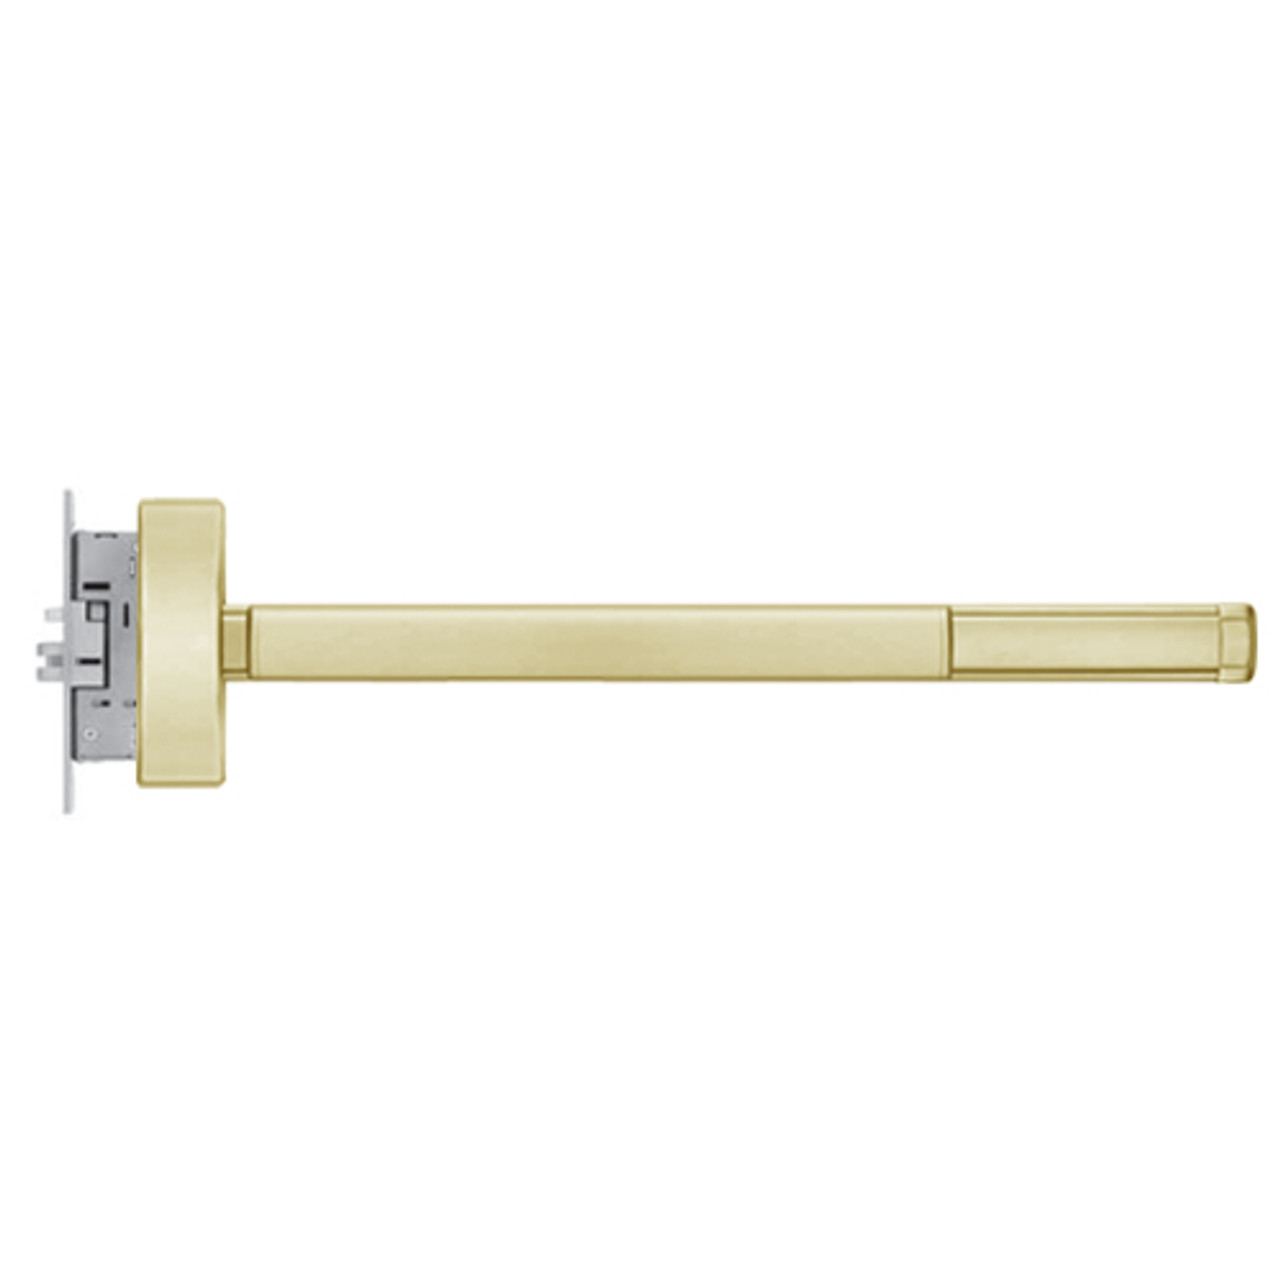 ELRFL2305-RHR-606-48 PHI 2300 Series Fire Rated Apex Mortise Exit Device with Electric Latch Retraction Prepped for Key Controls Thumb Piece in Satin Brass Finish